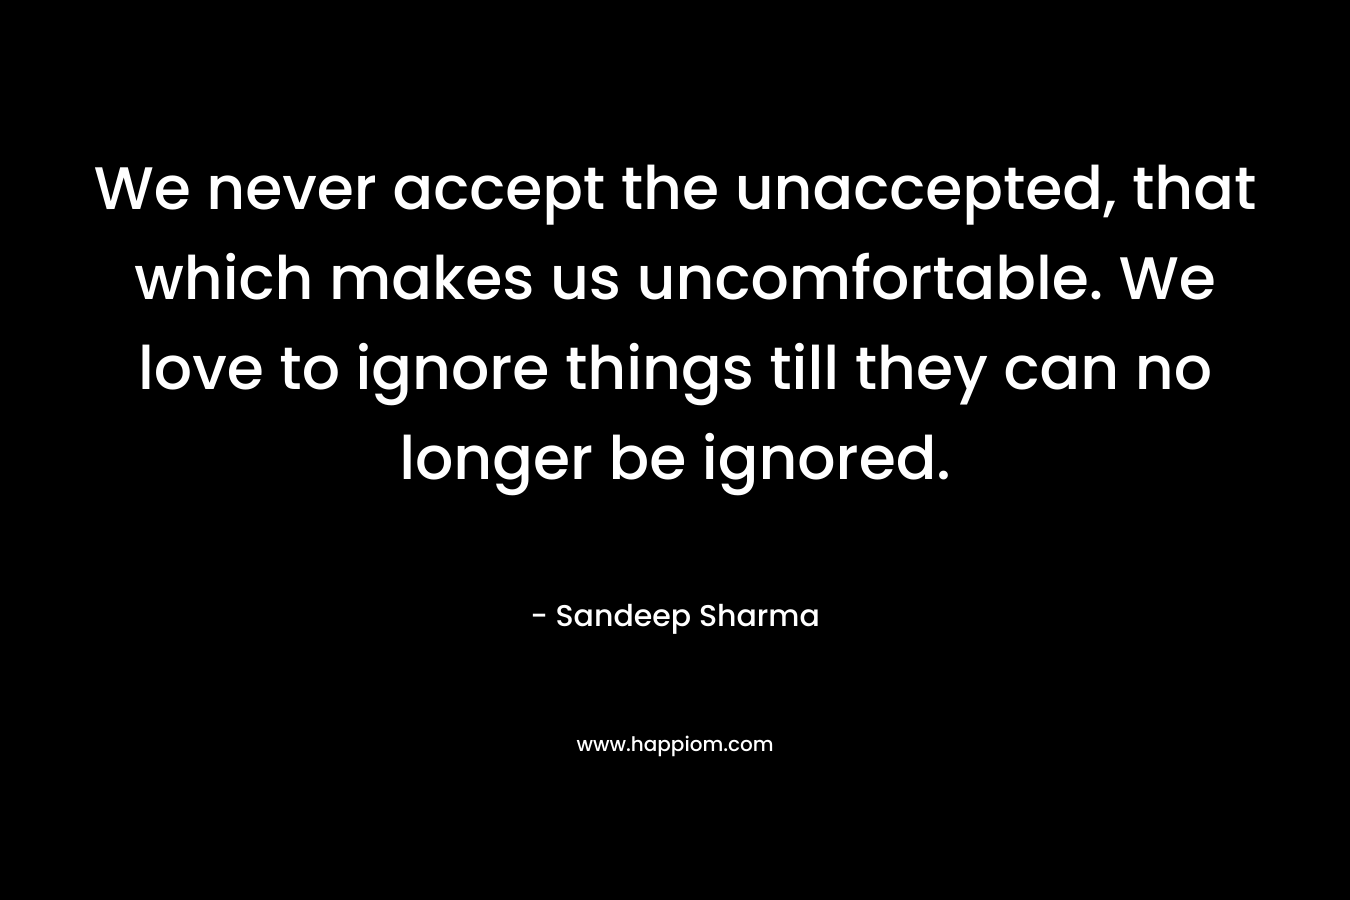 We never accept the unaccepted, that which makes us uncomfortable. We love to ignore things till they can no longer be ignored. – Sandeep Sharma